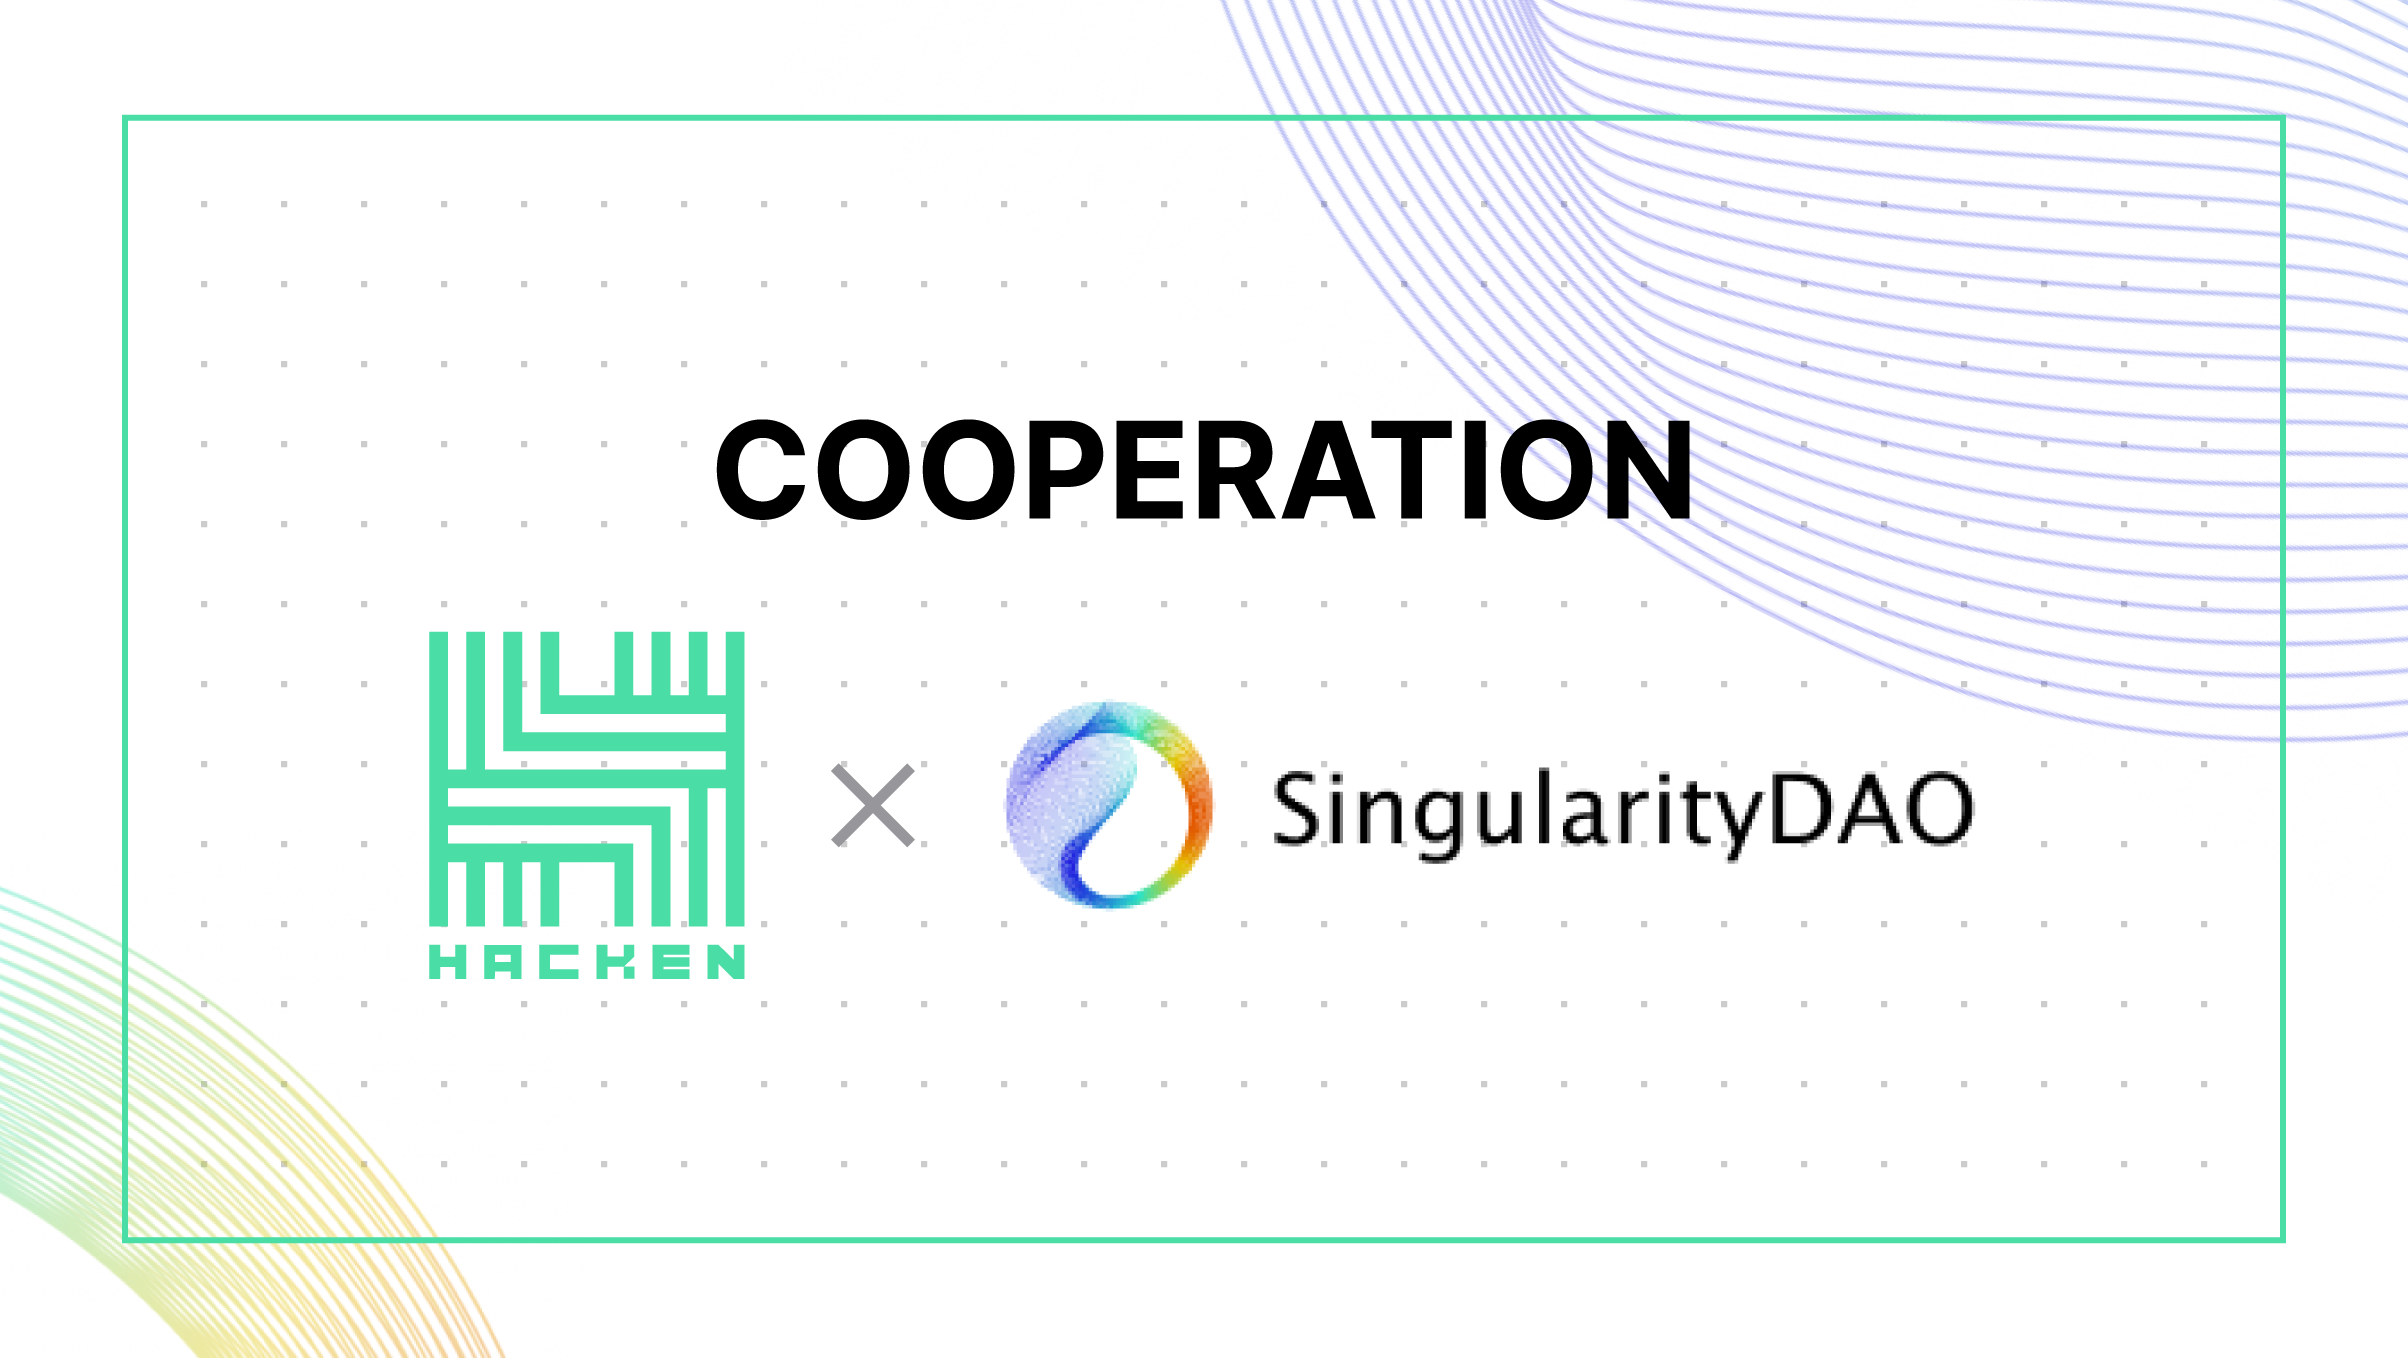 Singularity DAO is entering into cooperation with Hacken